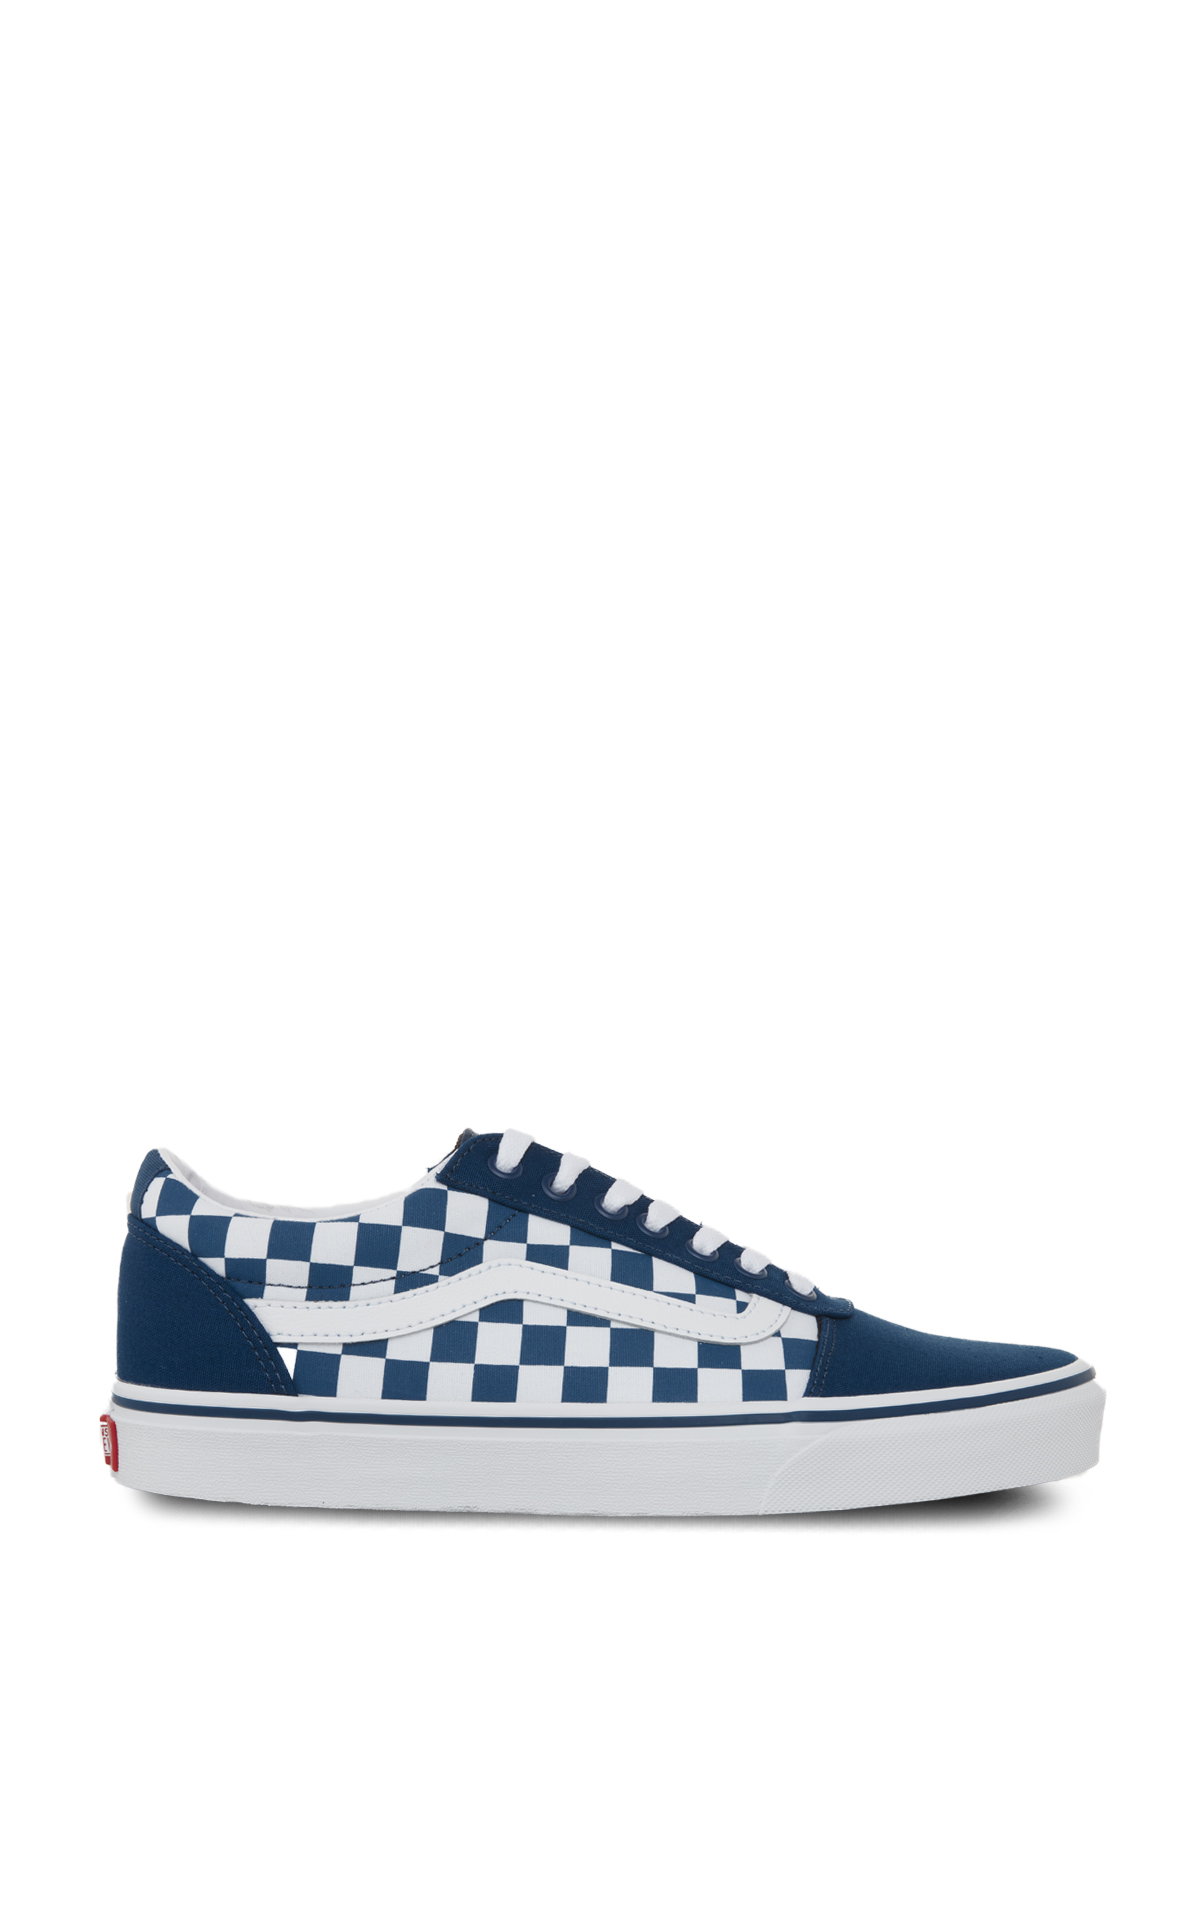  Low-top checkered sneakers